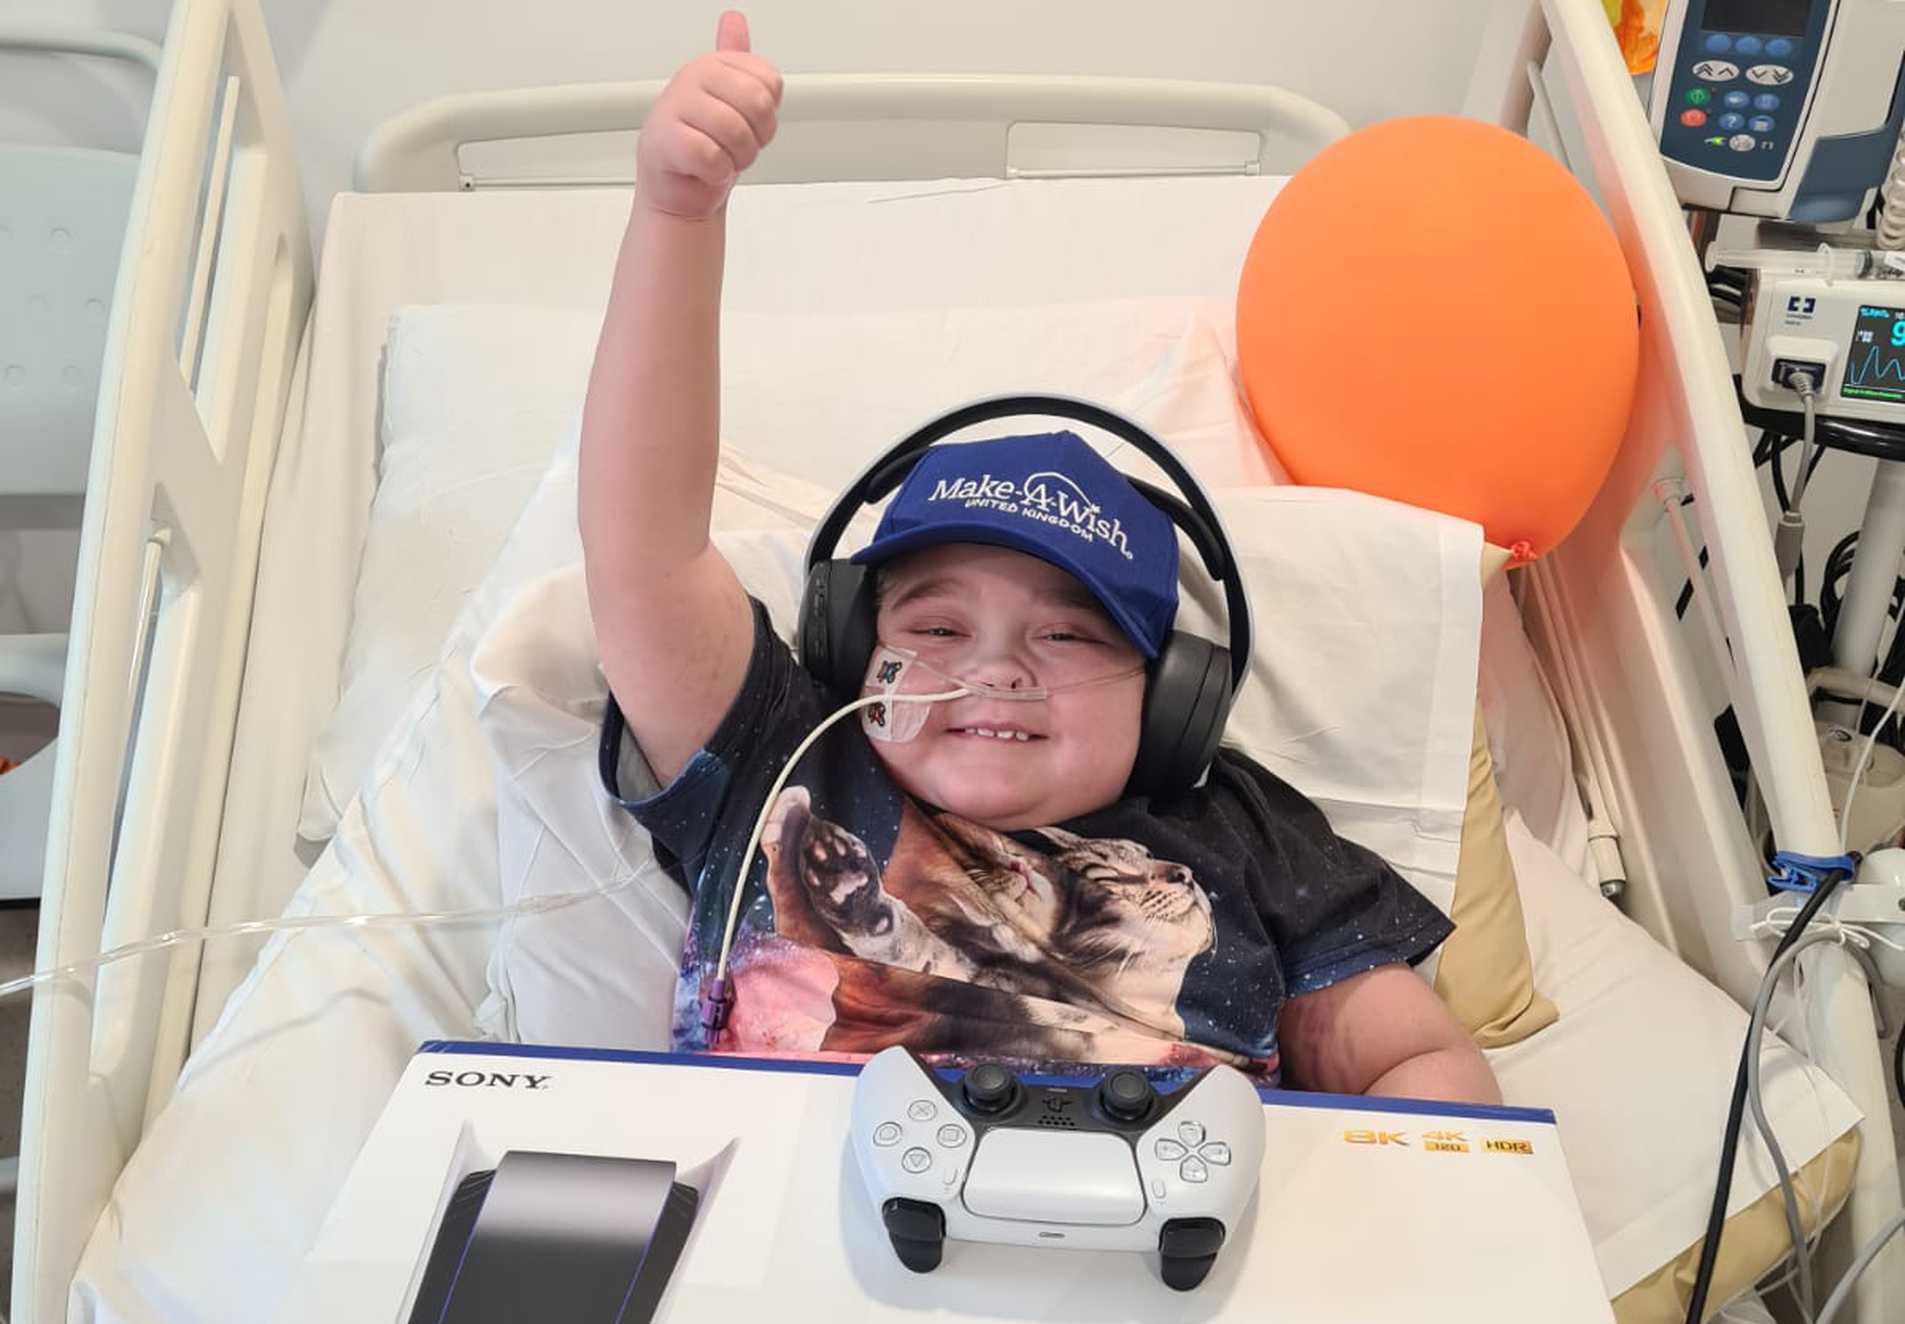 Zakk giving a big thumbs up from his hospital bed while holding his new PS5.